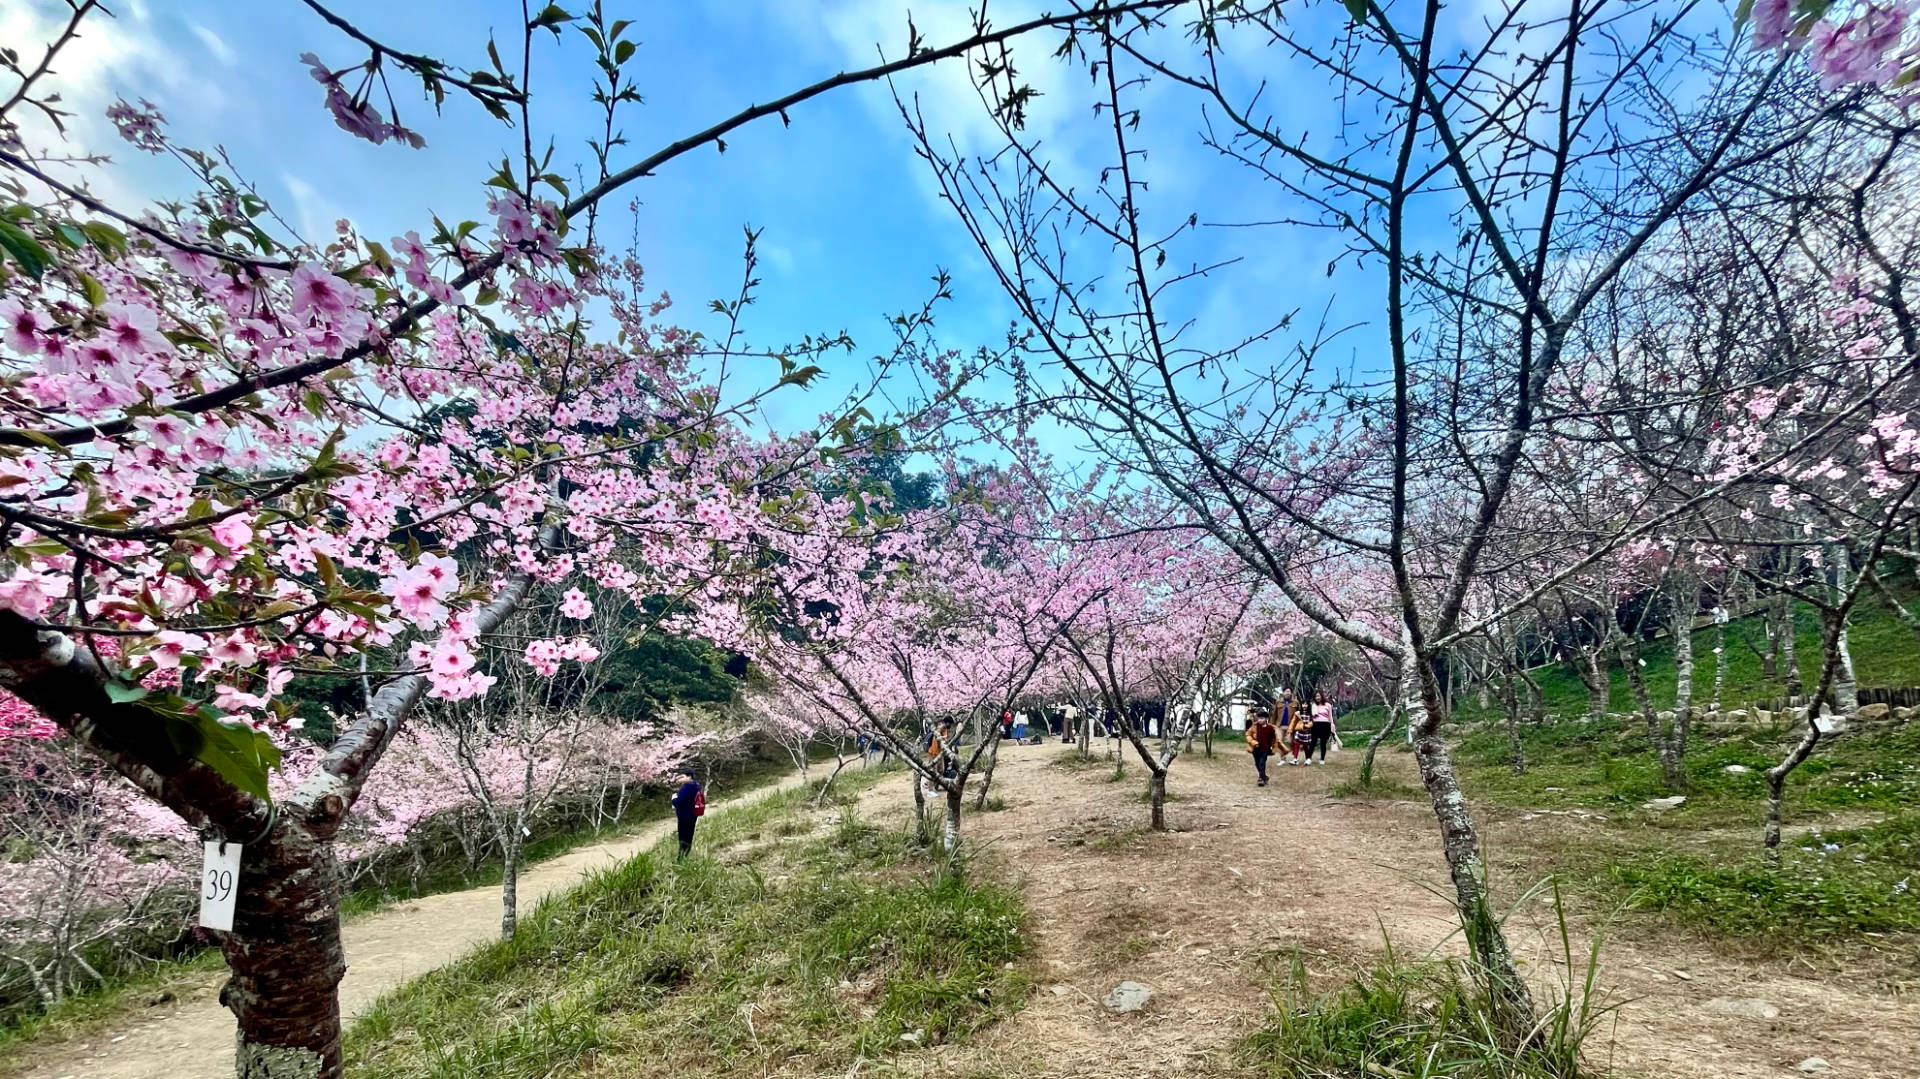 Light pink cherry blossom trees in the foreground, with people gathering under the trees in the distance. The sky is bright blue, with little cloud.